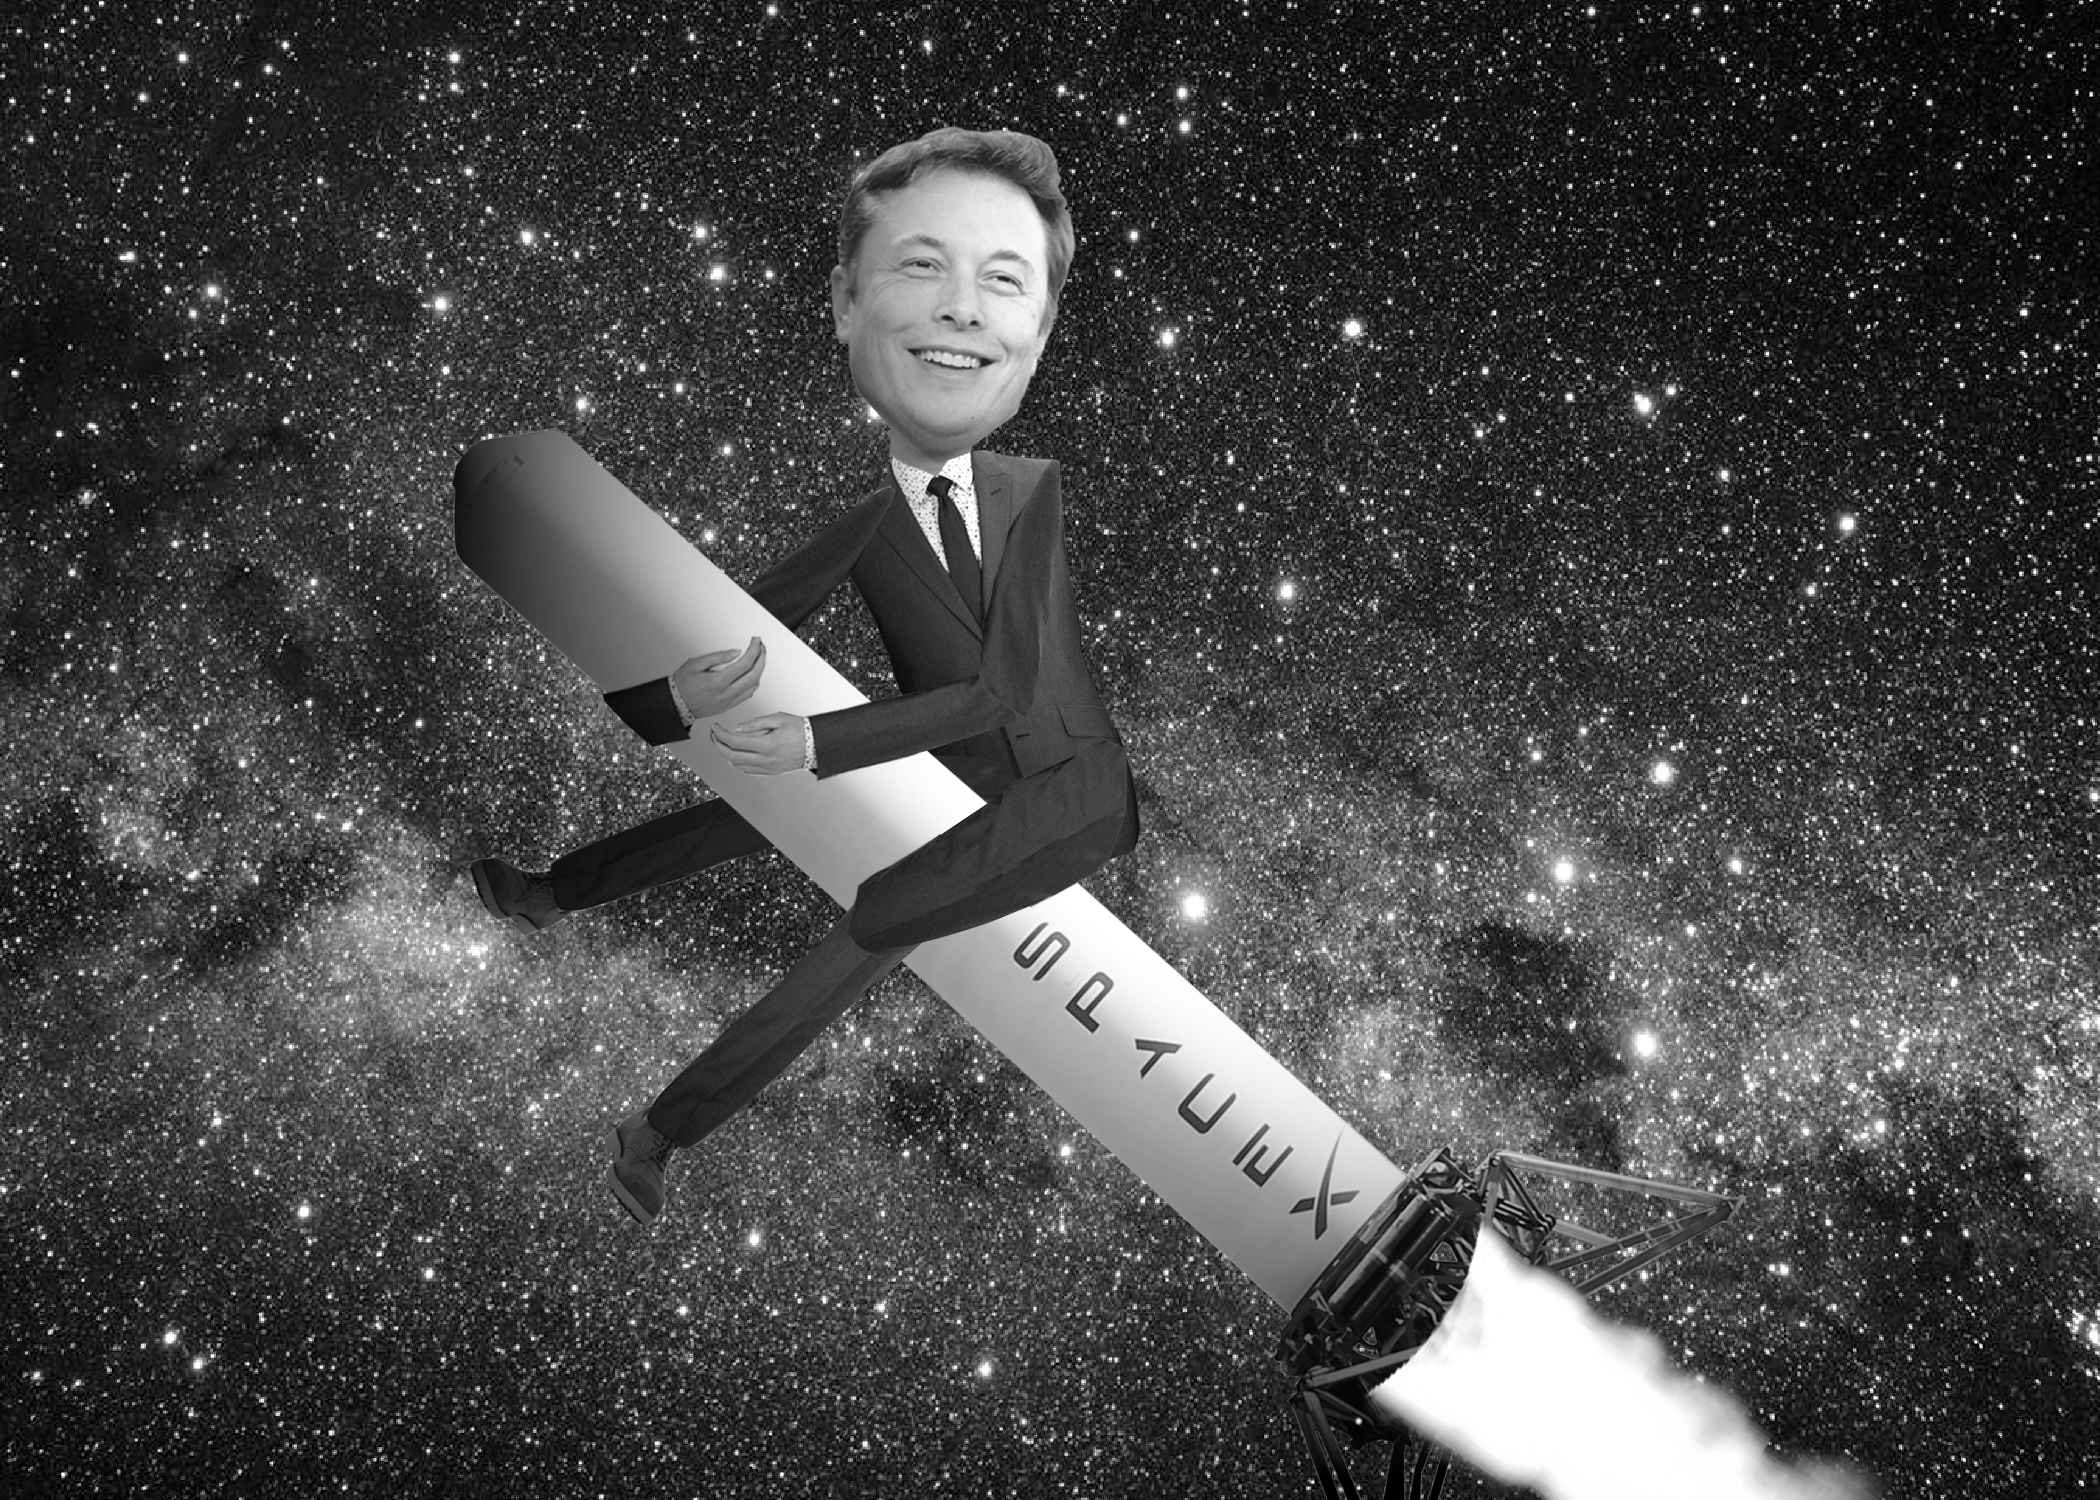 I just don’t get Elon Musk’s sexual fascination with space exploration